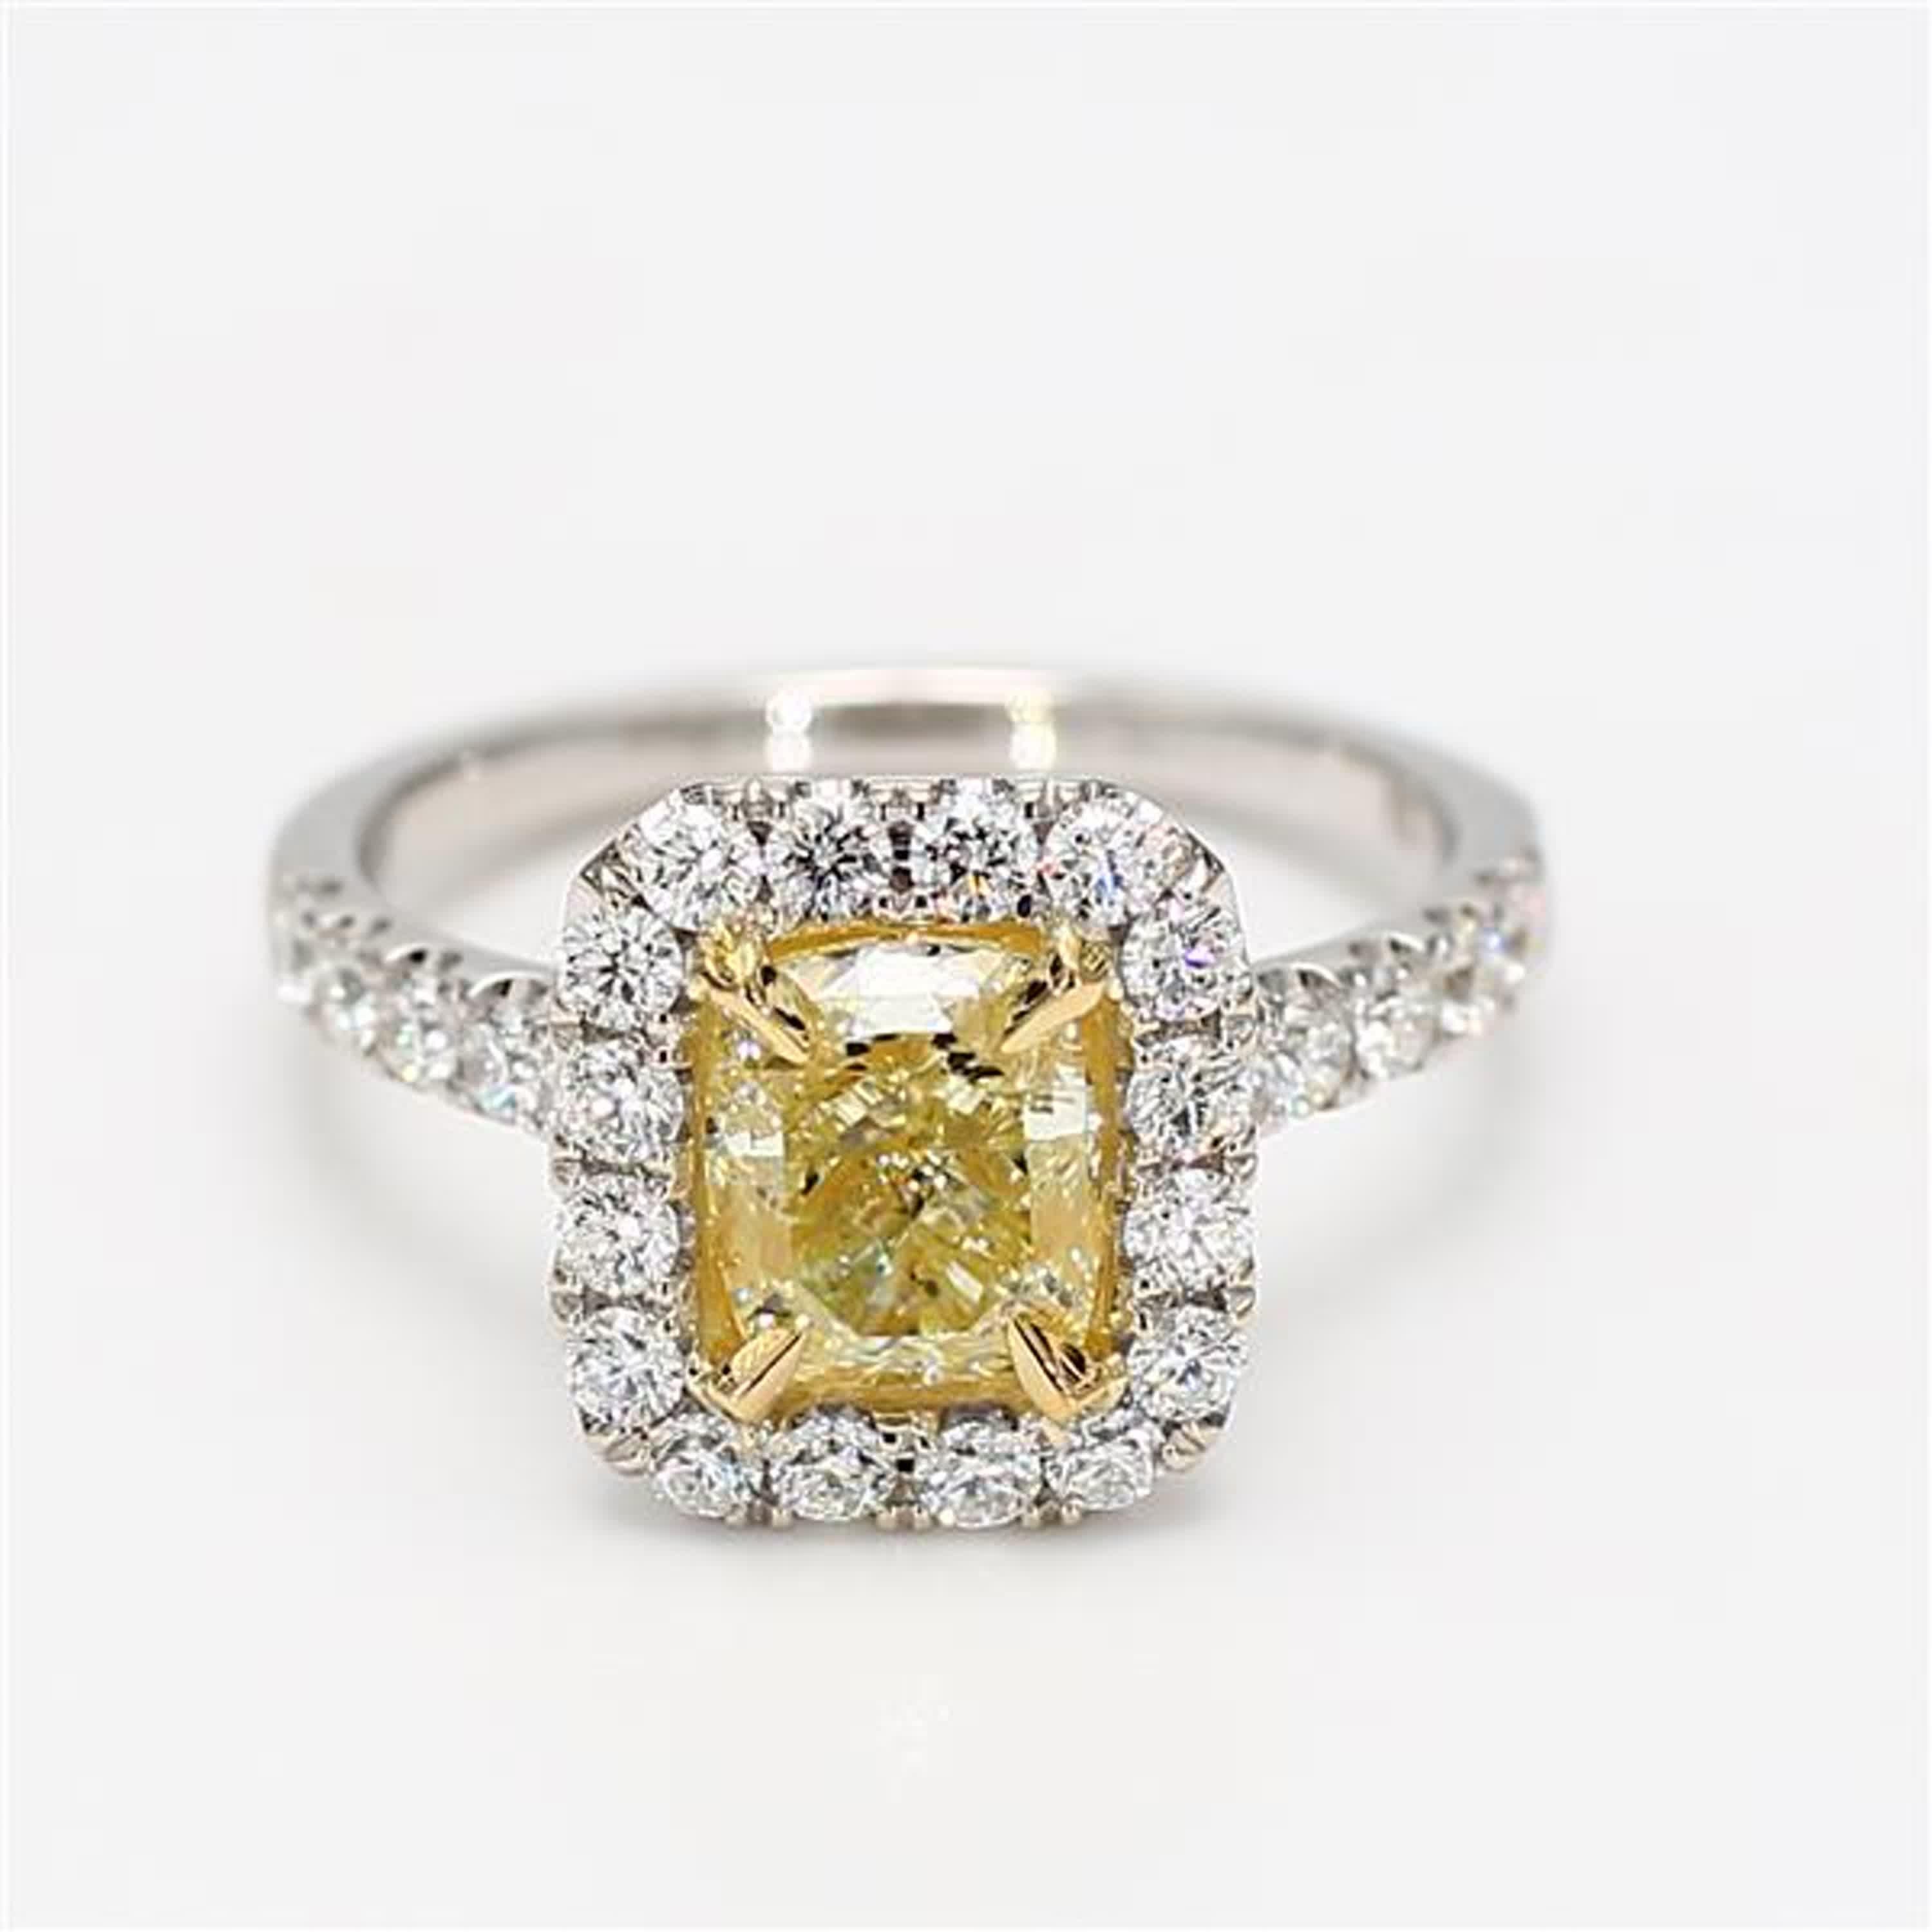 RareGemWorld's classic diamond ring. Mounted in a beautiful 18K Yellow and White Gold setting with a natural cushion cut yellow diamond. The yellow diamond is surrounded by small round natural white diamond melee. This ring is guaranteed to impress